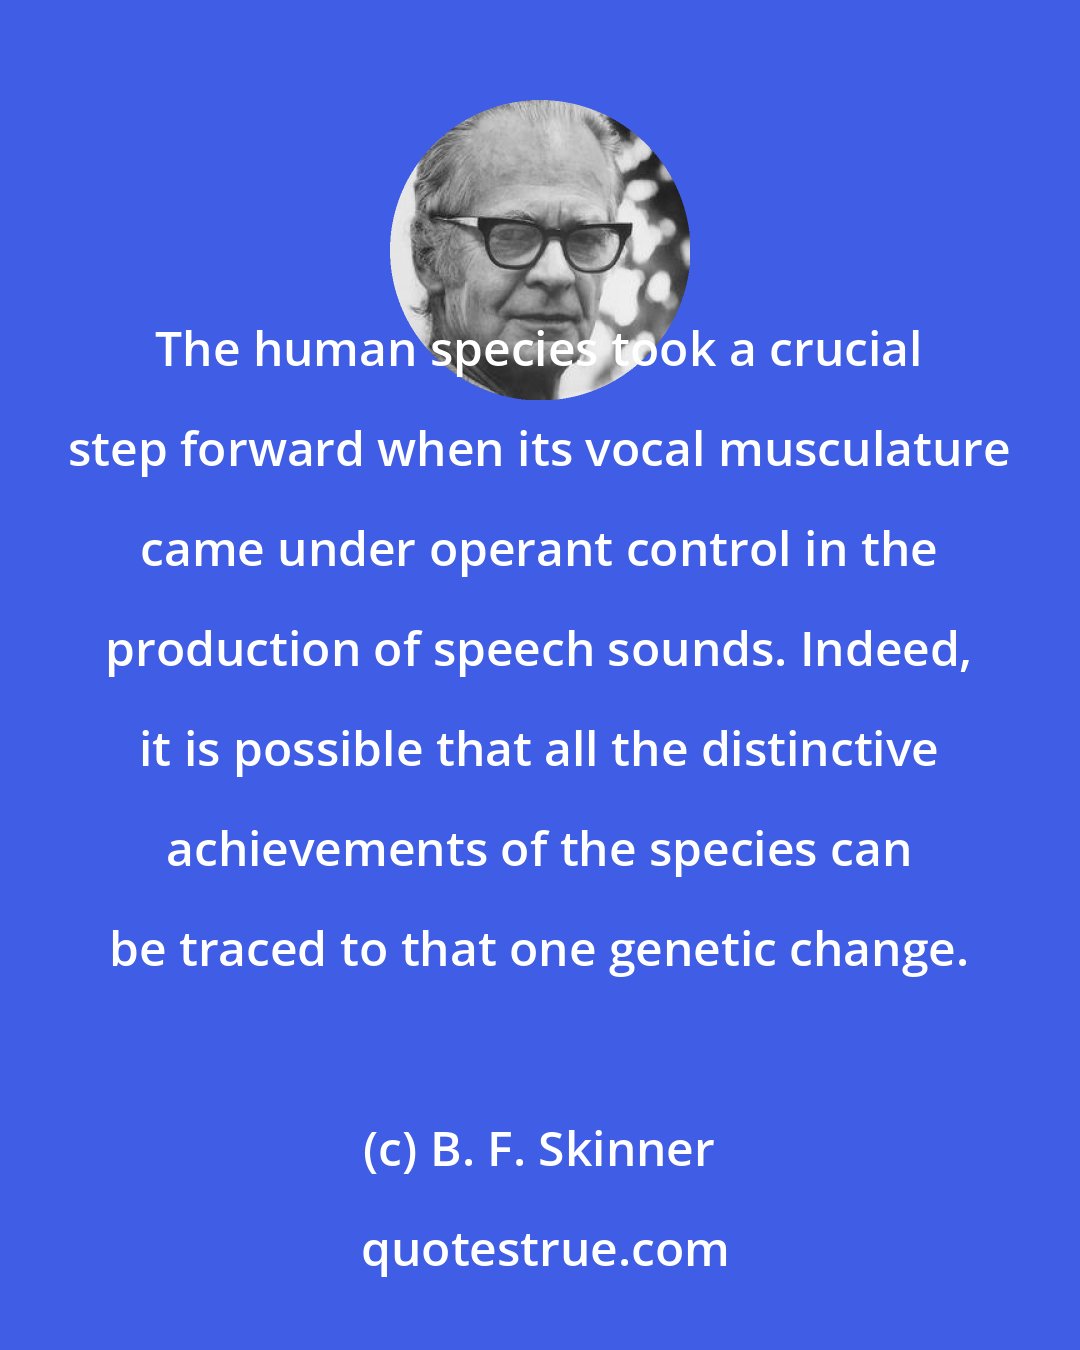 B. F. Skinner: The human species took a crucial step forward when its vocal musculature came under operant control in the production of speech sounds. Indeed, it is possible that all the distinctive achievements of the species can be traced to that one genetic change.